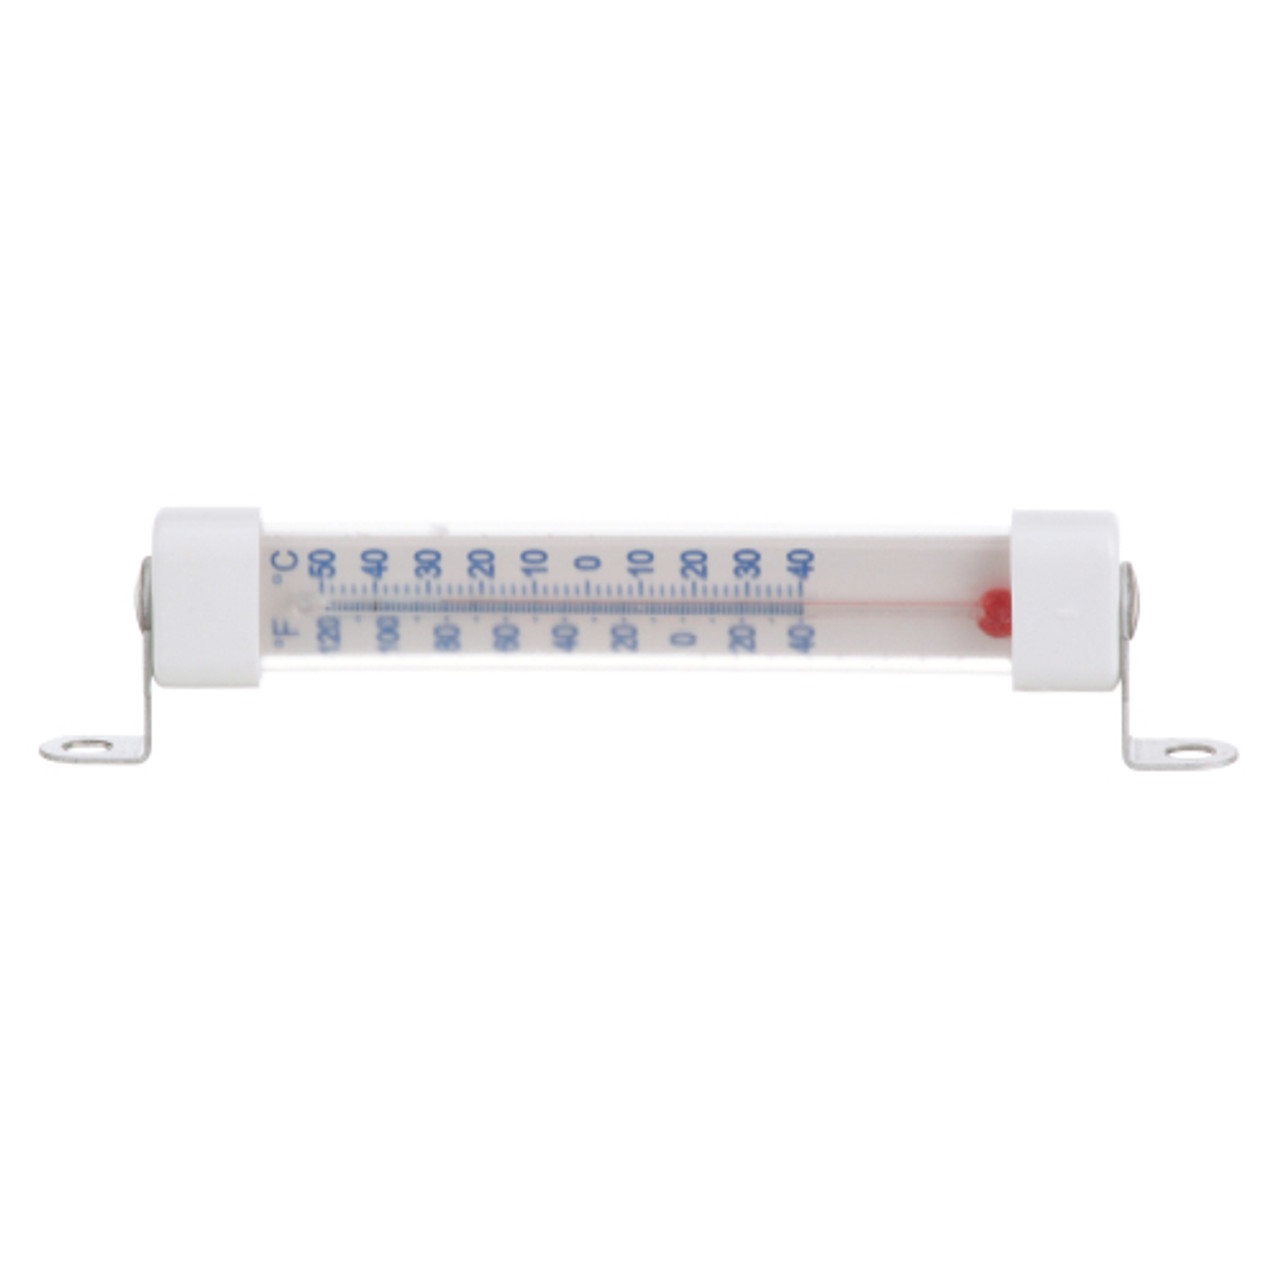 Thermometer (2 Brkt,-40/120F) - Replacement Part For Silver King 22409